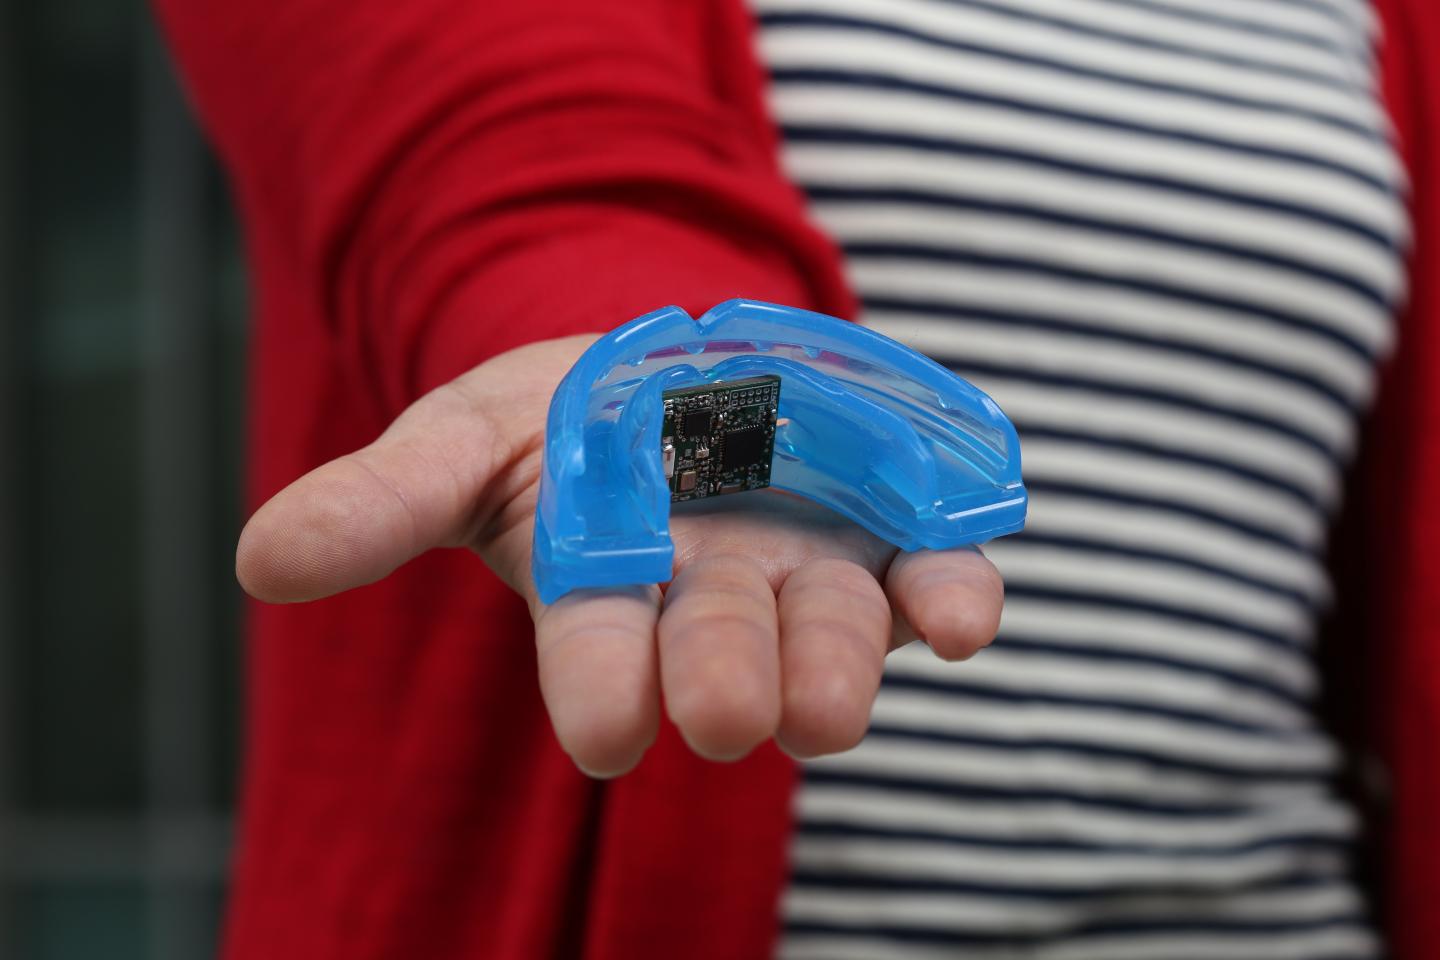 The mouth guard sensor offers an easy and reliable way to monitor uric acid levels in human saliva. Credit: Jacobs School of Engineering, UC San Diego